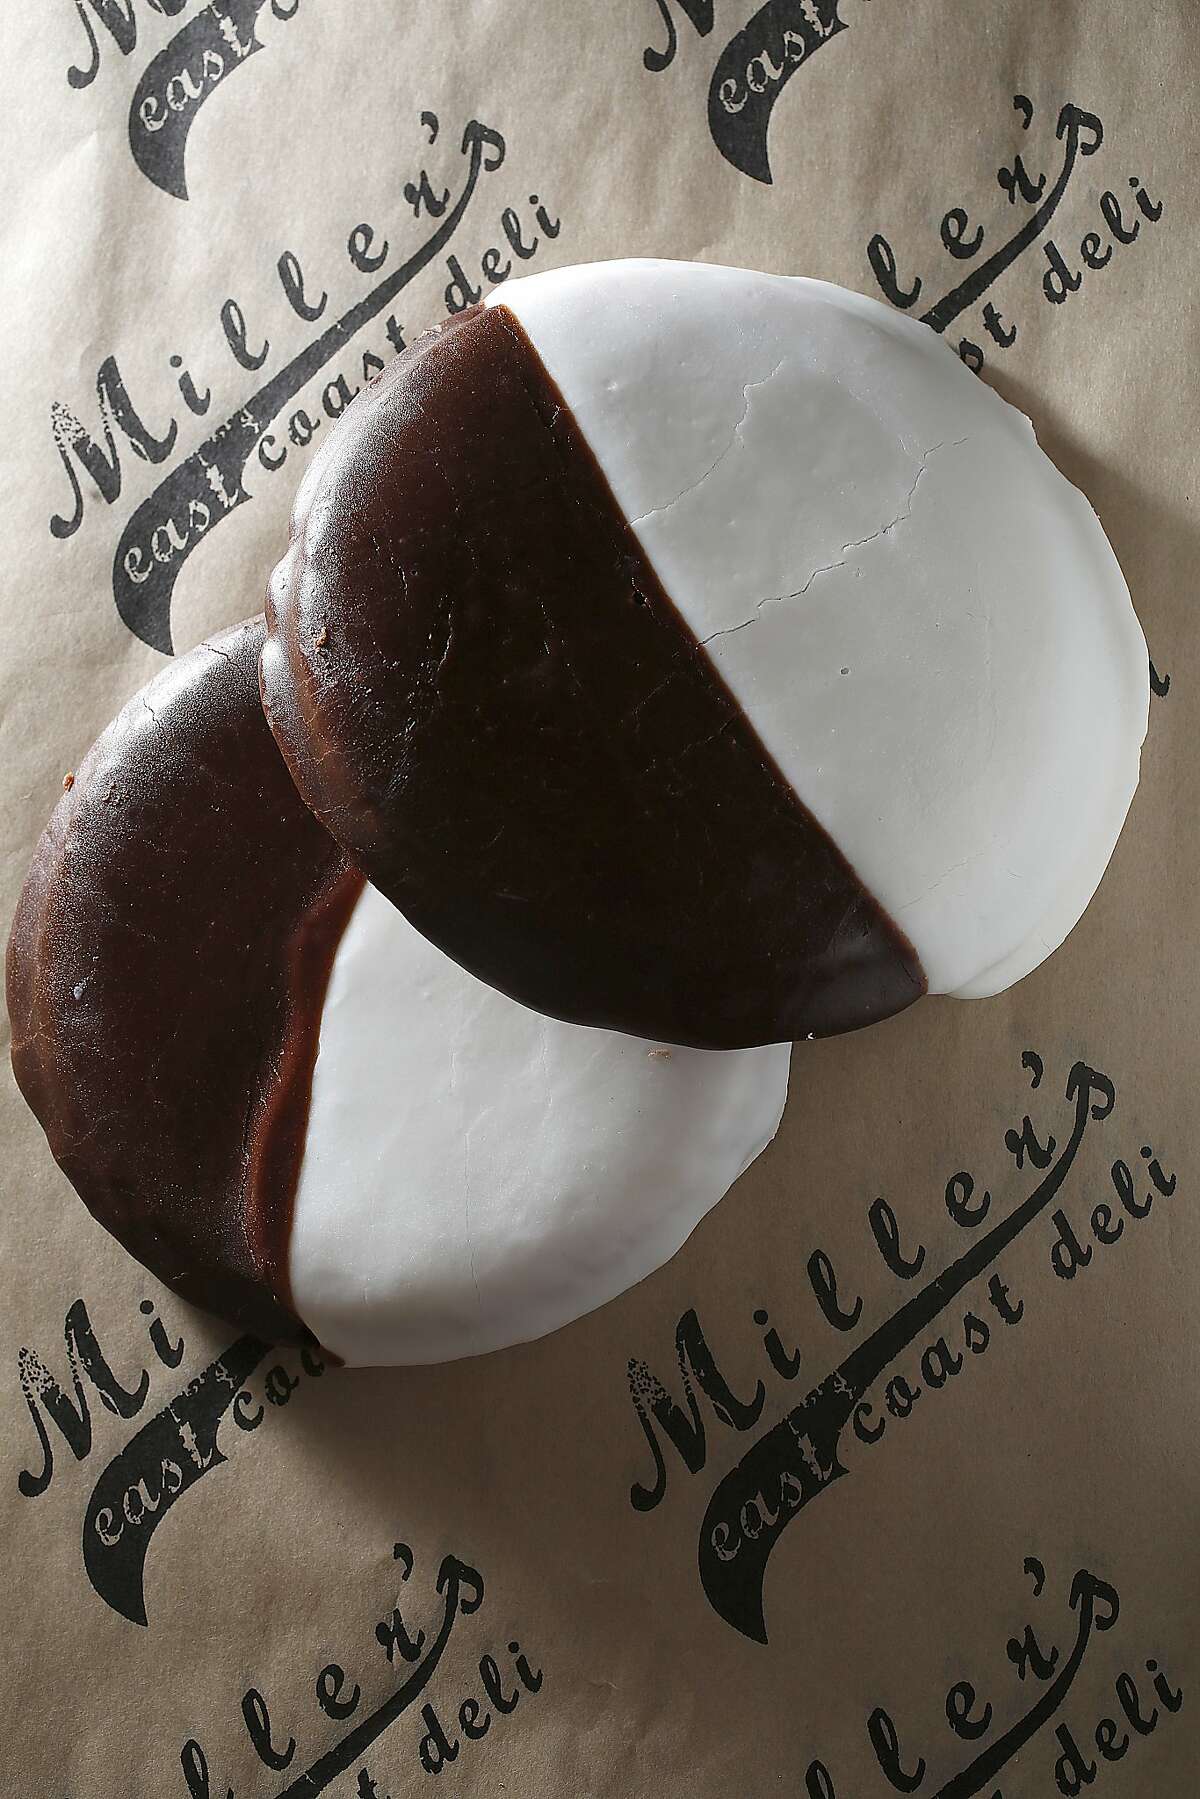 Black-and-white cookies from Miller's East Coast Deli in San Francisco. Postmates will be delivering food from Miller's for the Jewish holidays.